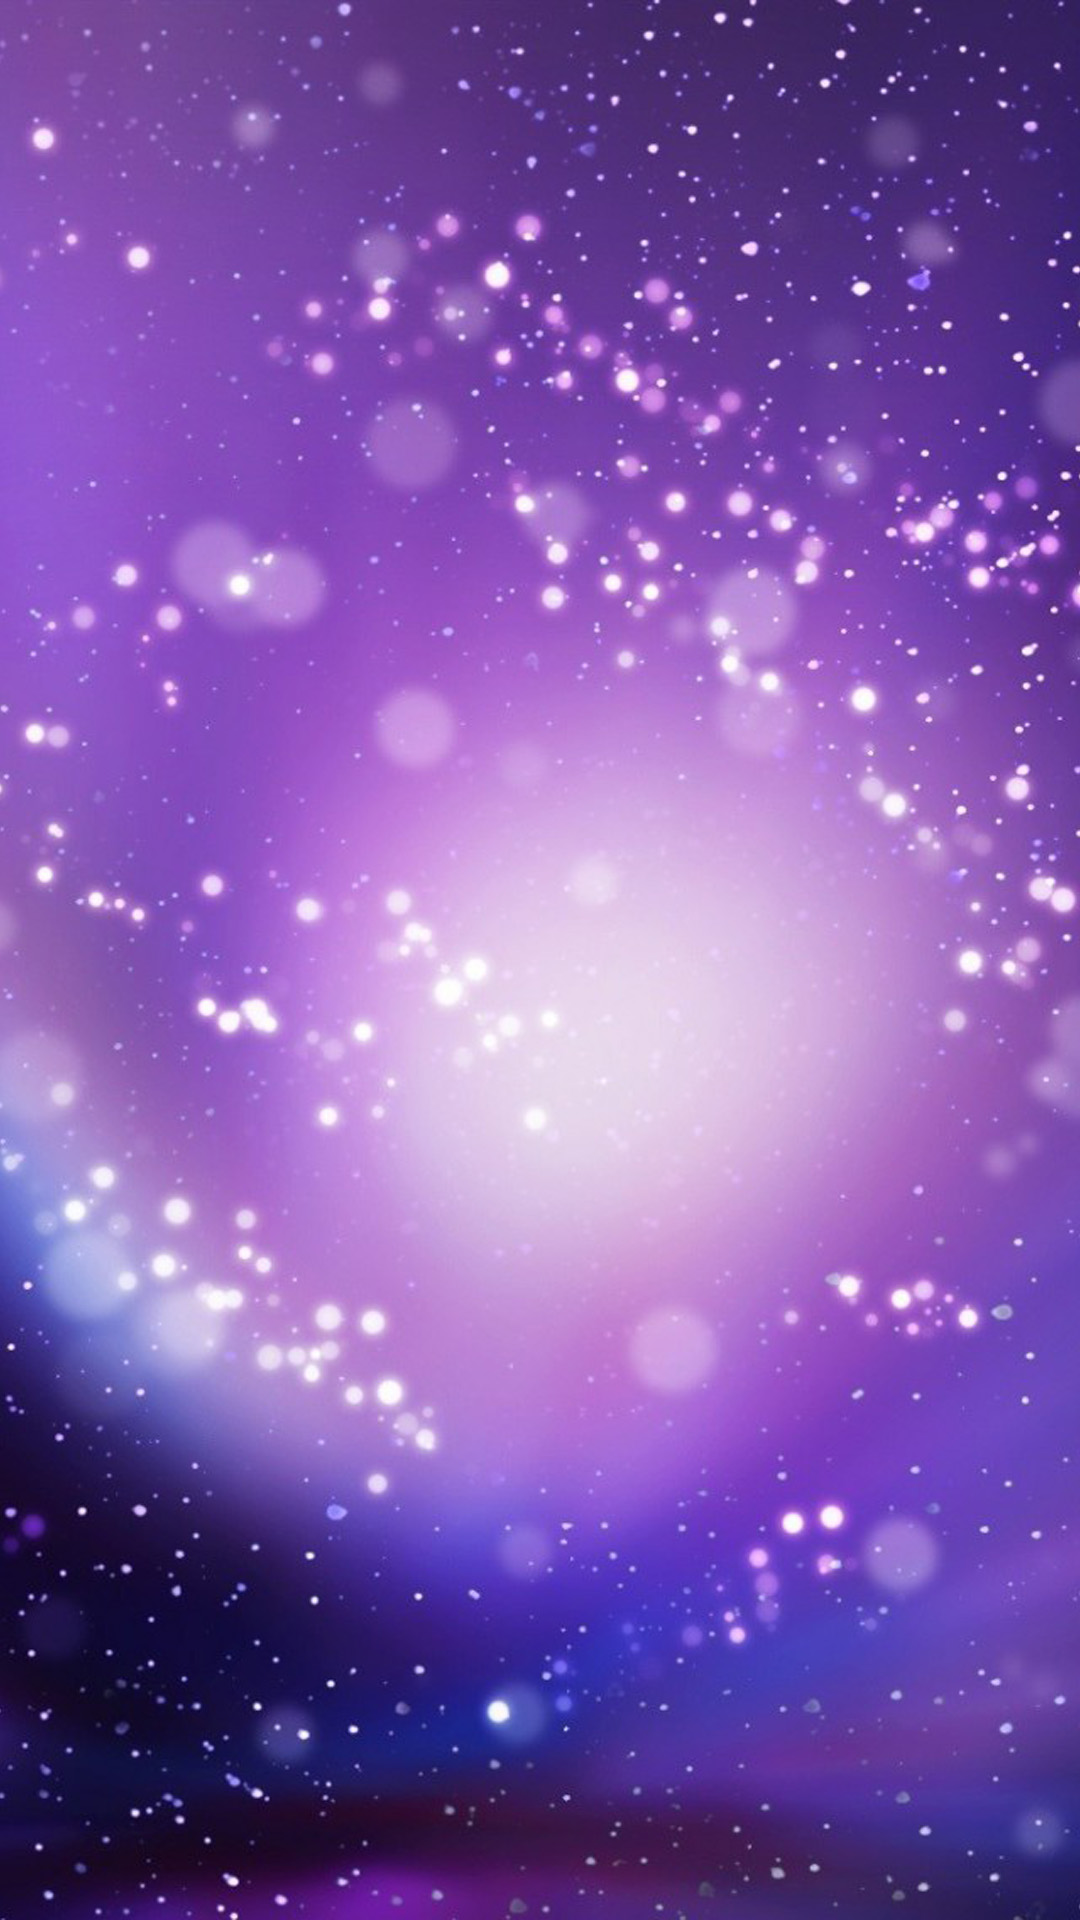 Purple Nebula Android Wallpaper - Purple And Blue Space - HD Wallpaper 